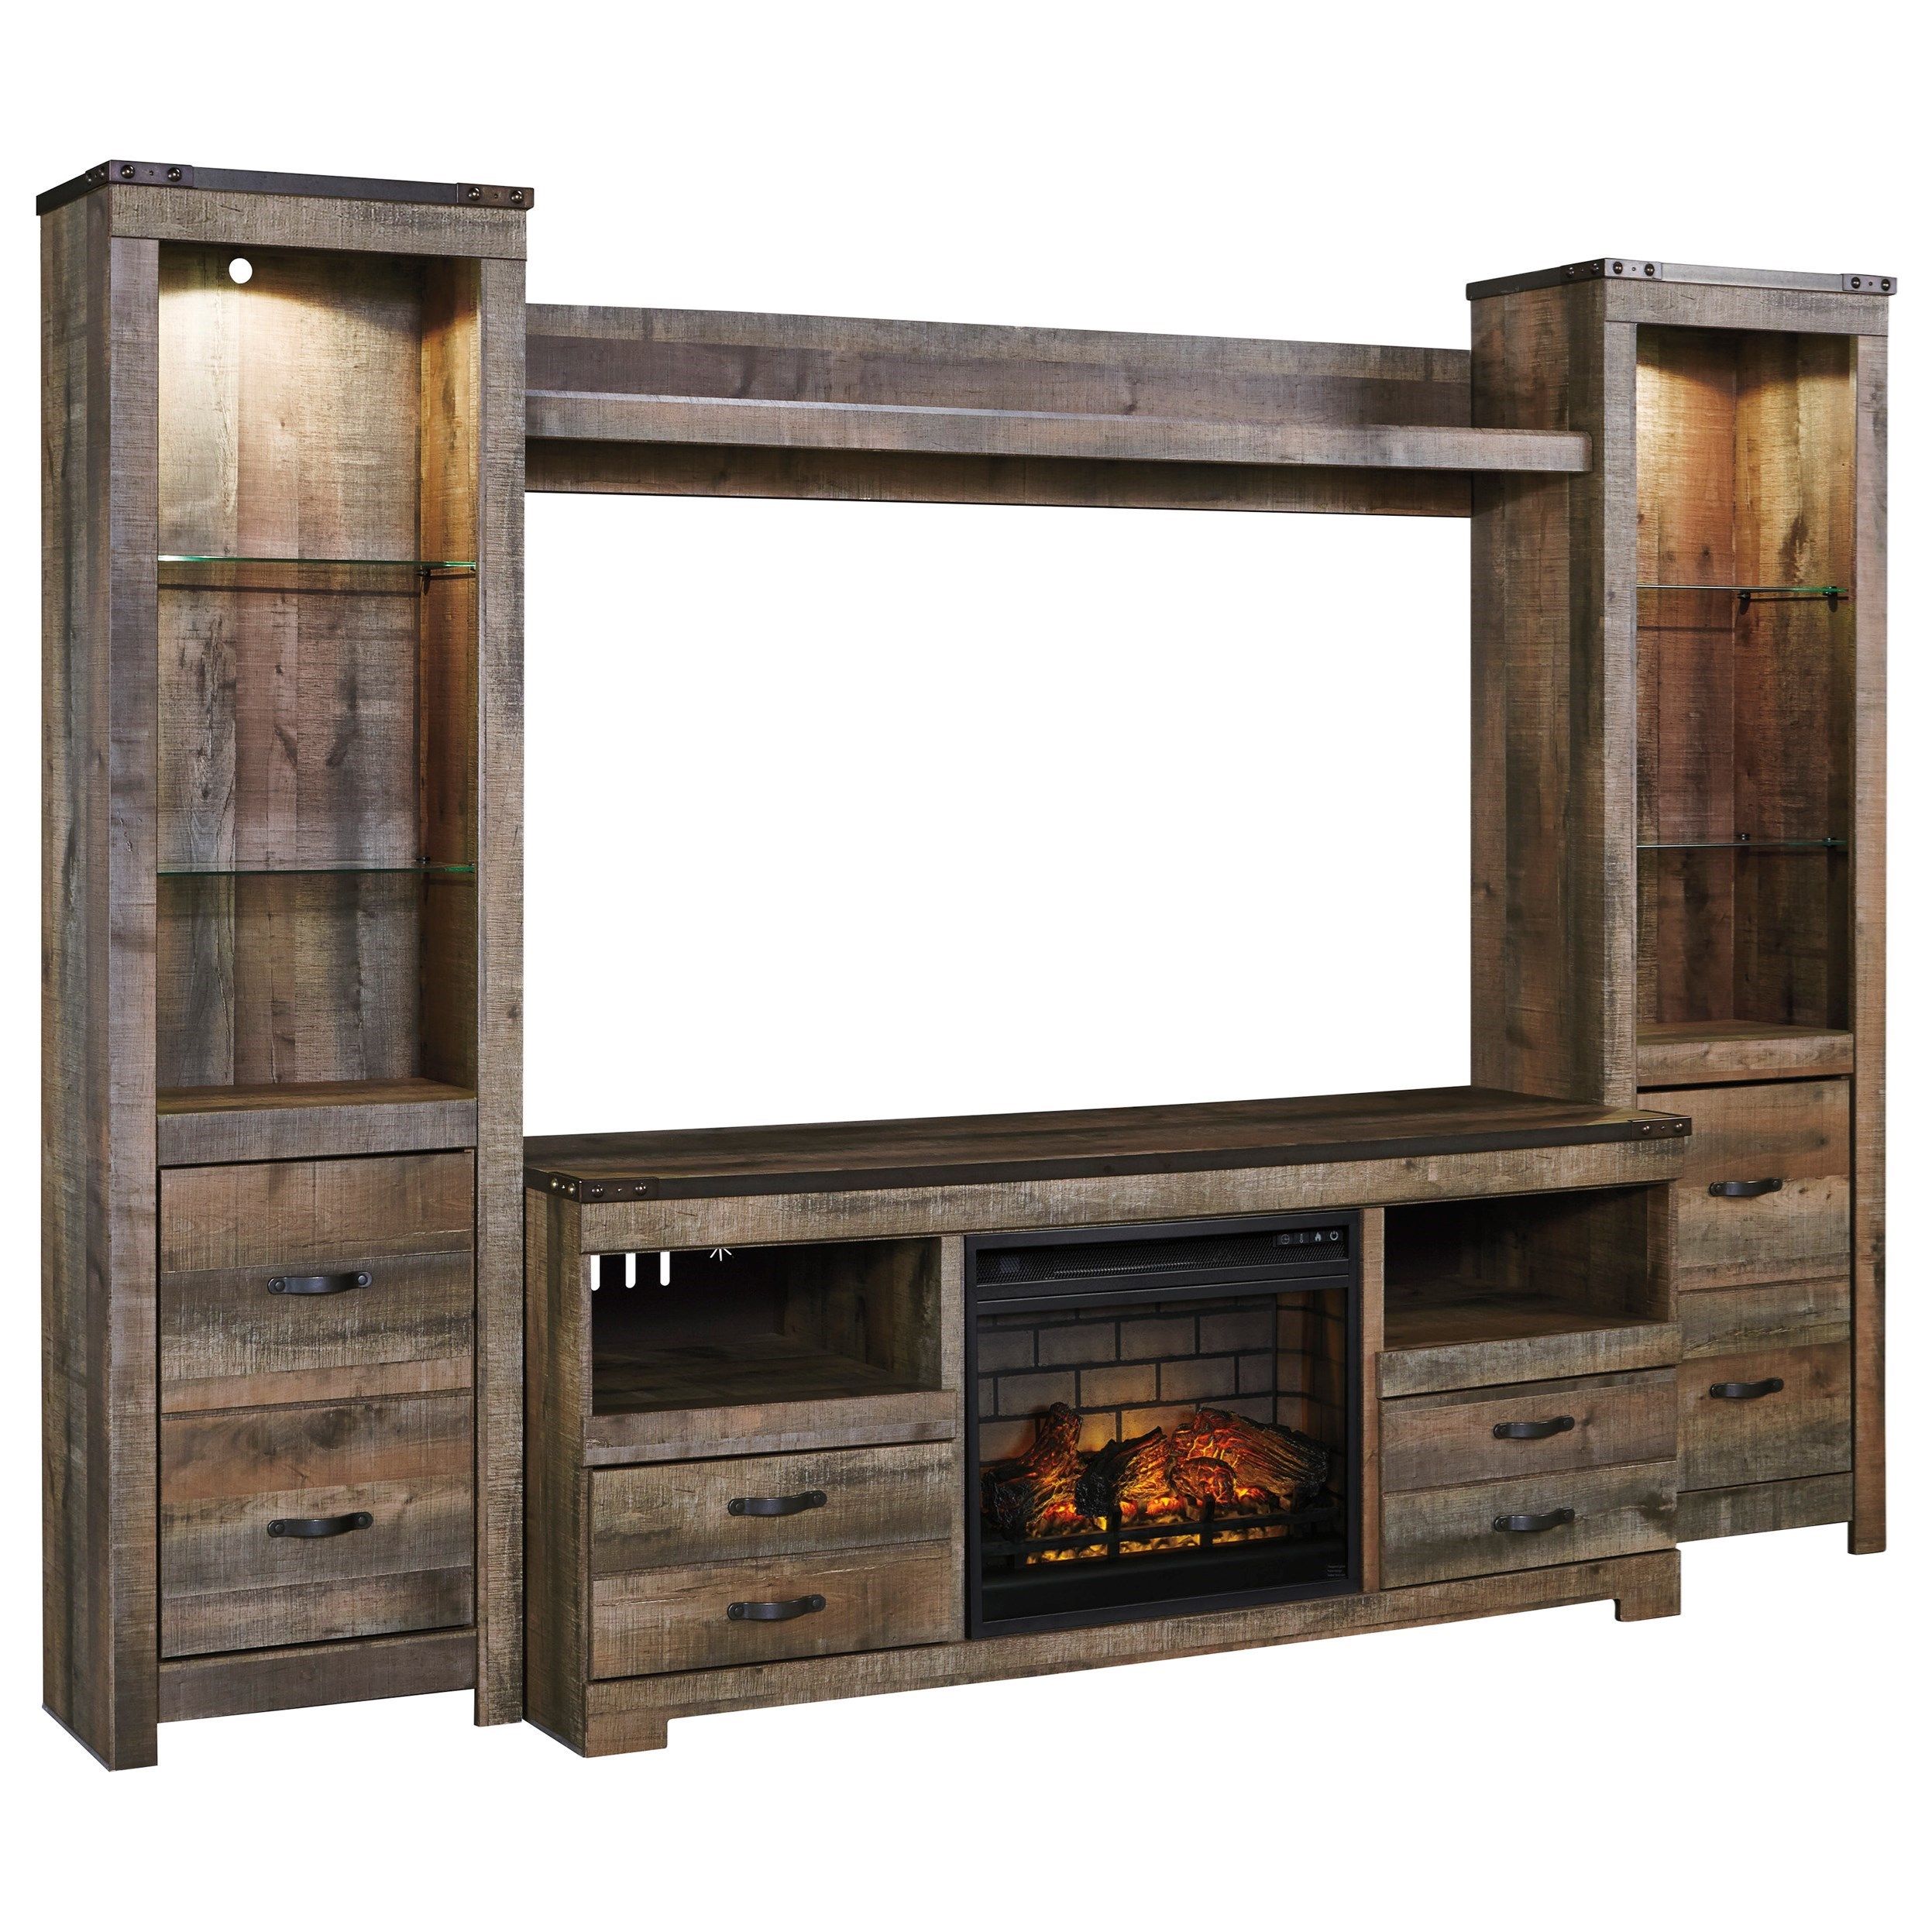 Signature Designashley Trinell W446W8 Rustic Large Tv Stand W/  Fireplace Insert, 2 Tall Piers, & Bridge | Factory Direct Furniture | Wall  Units For Entertainment Units With Bridge (View 2 of 15)